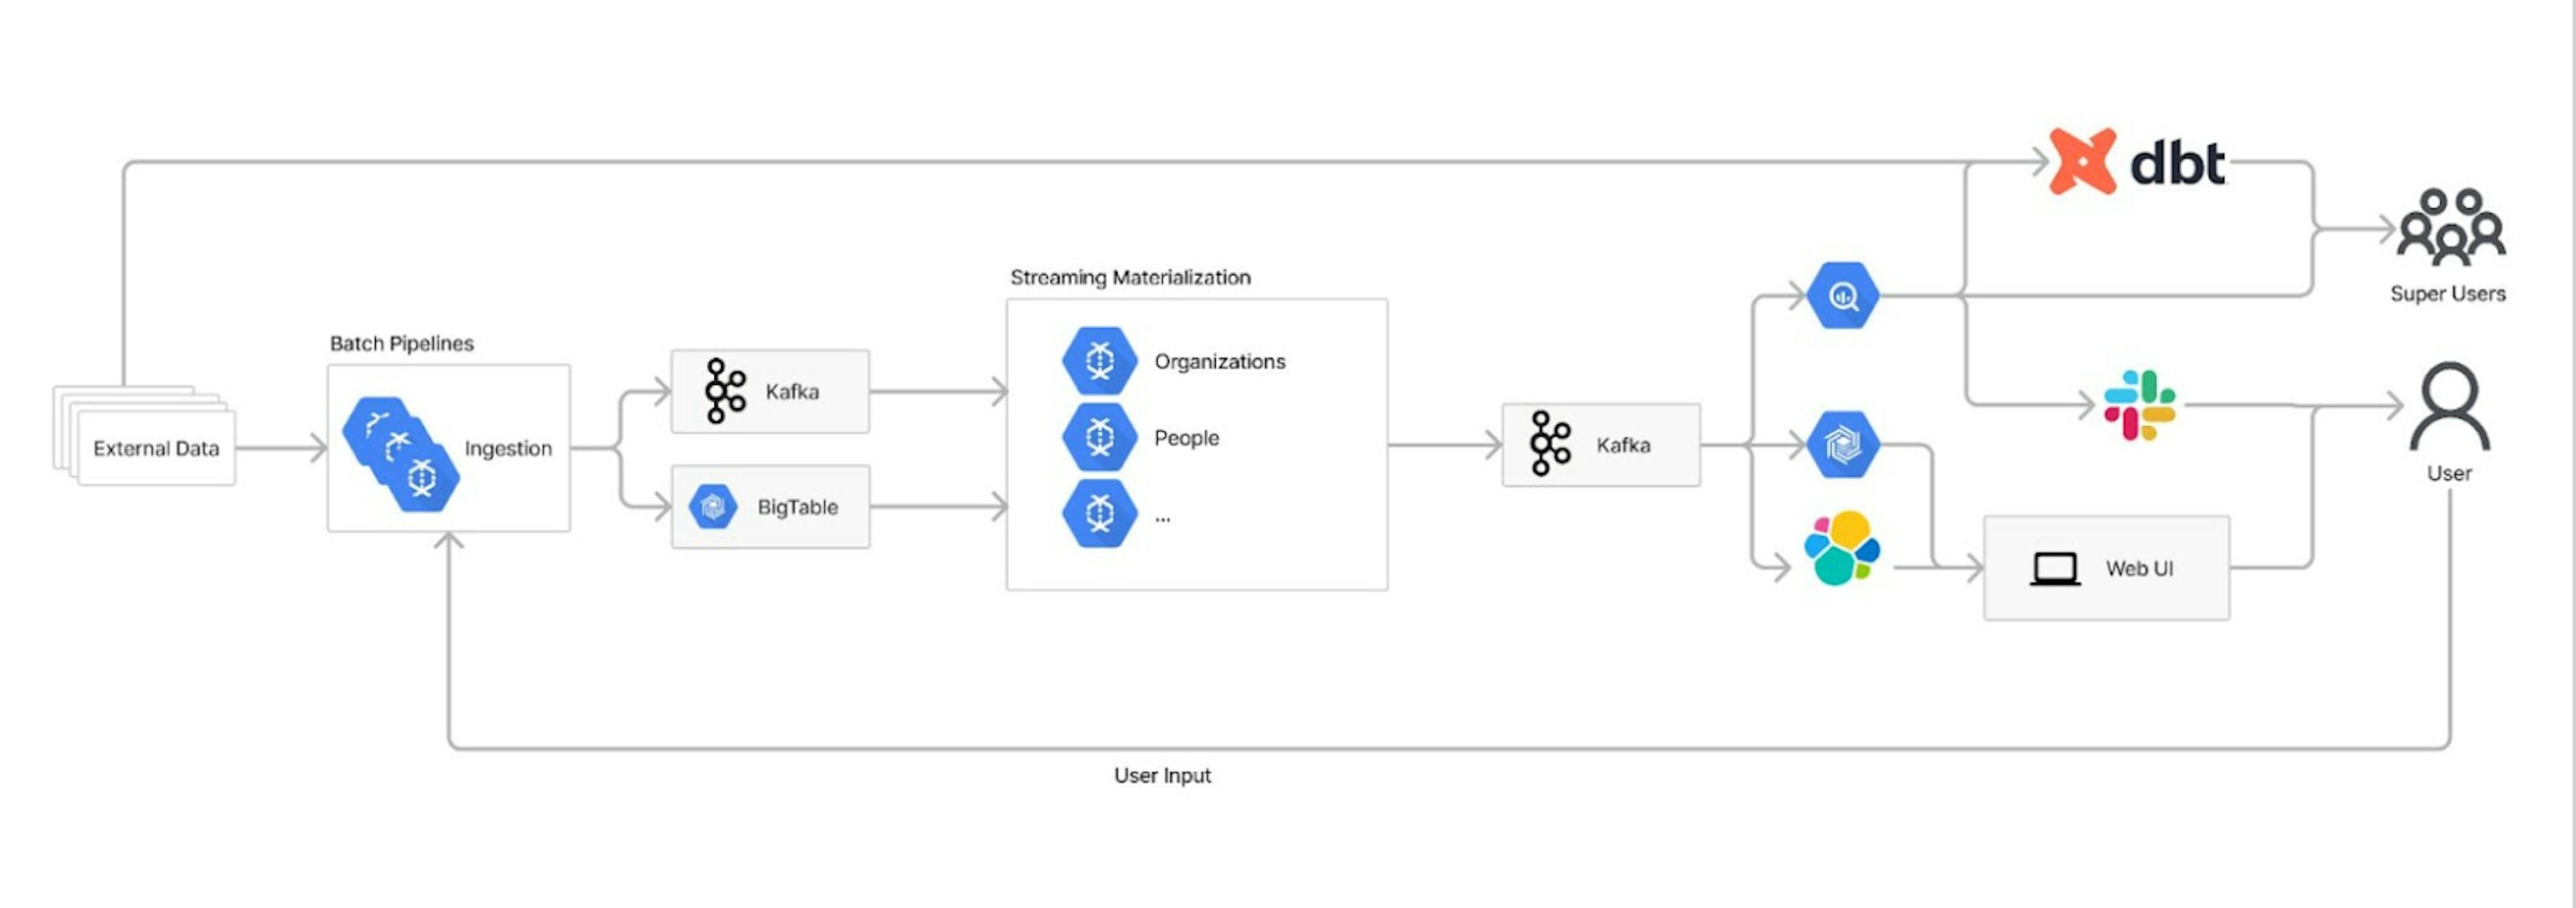 A simplification of Motherbrain's data architecture.